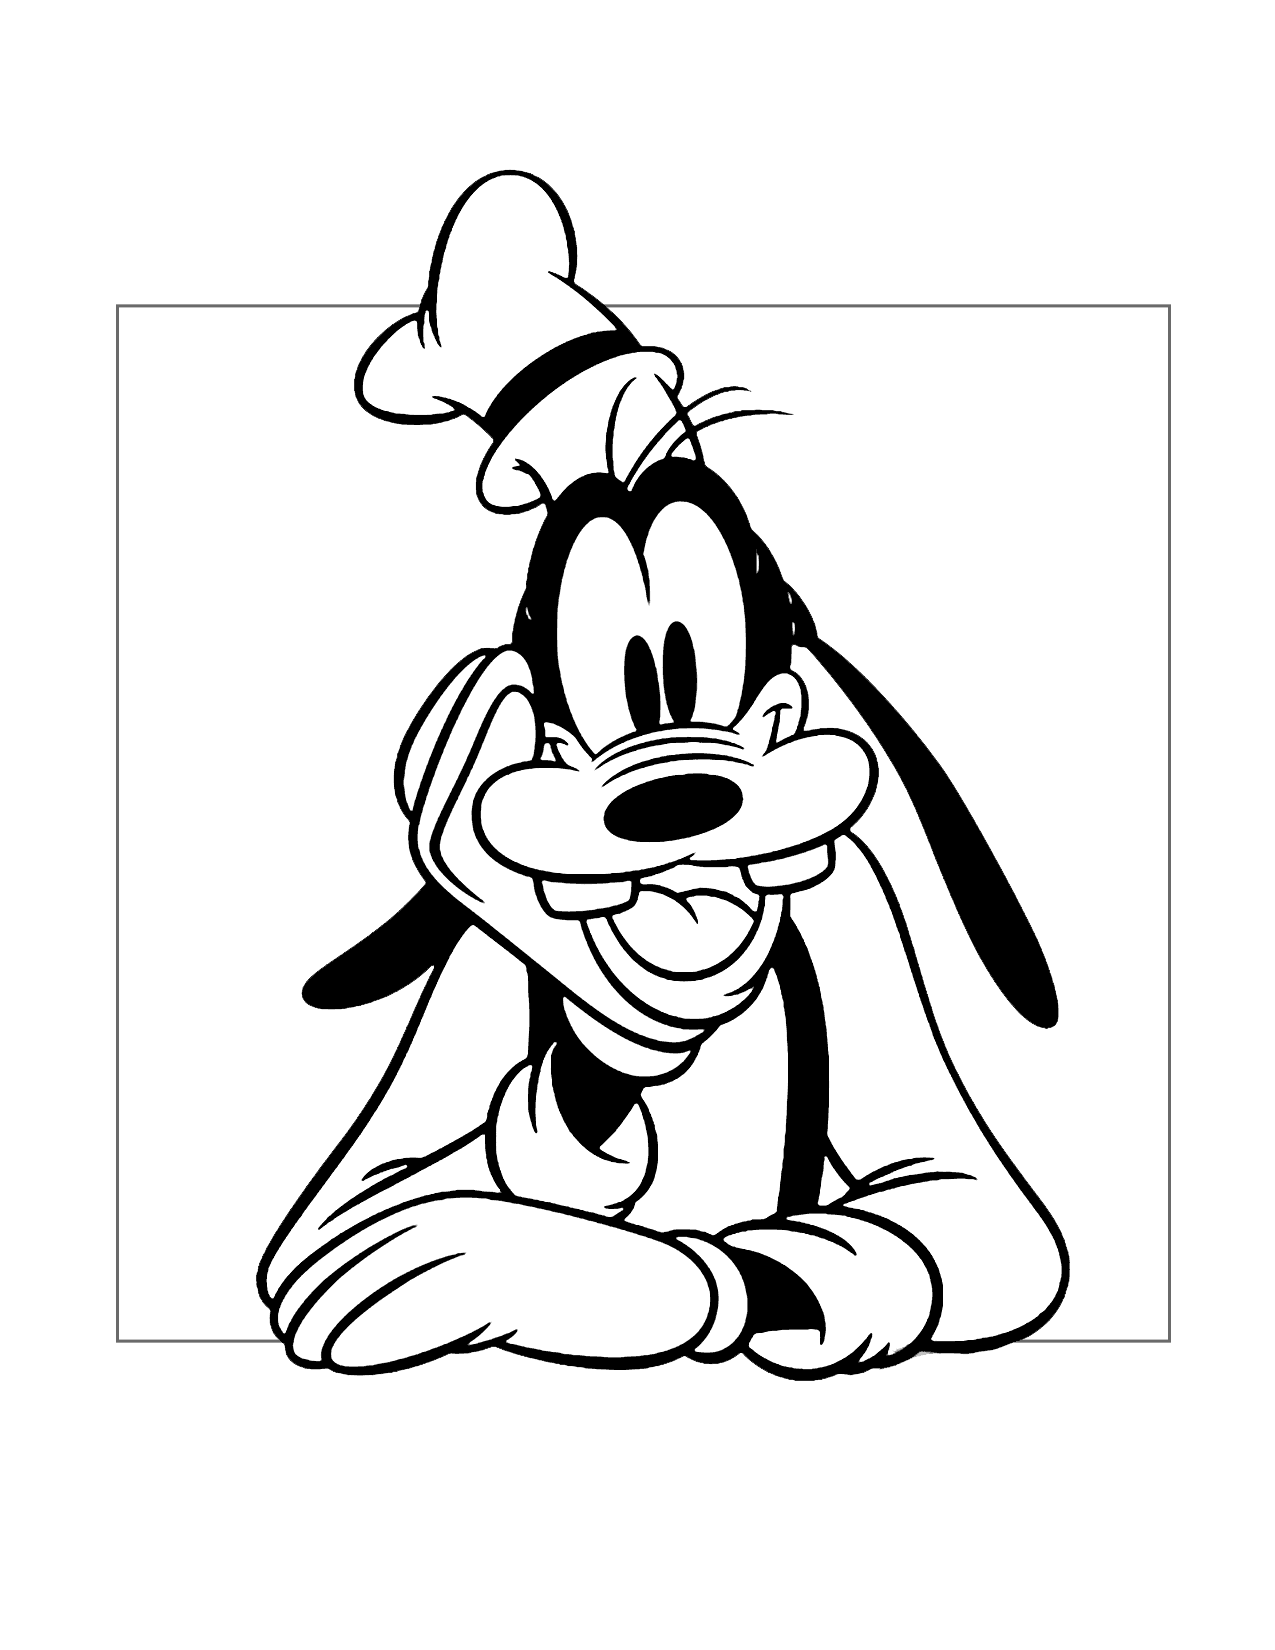 Cute Goofy Coloring Page